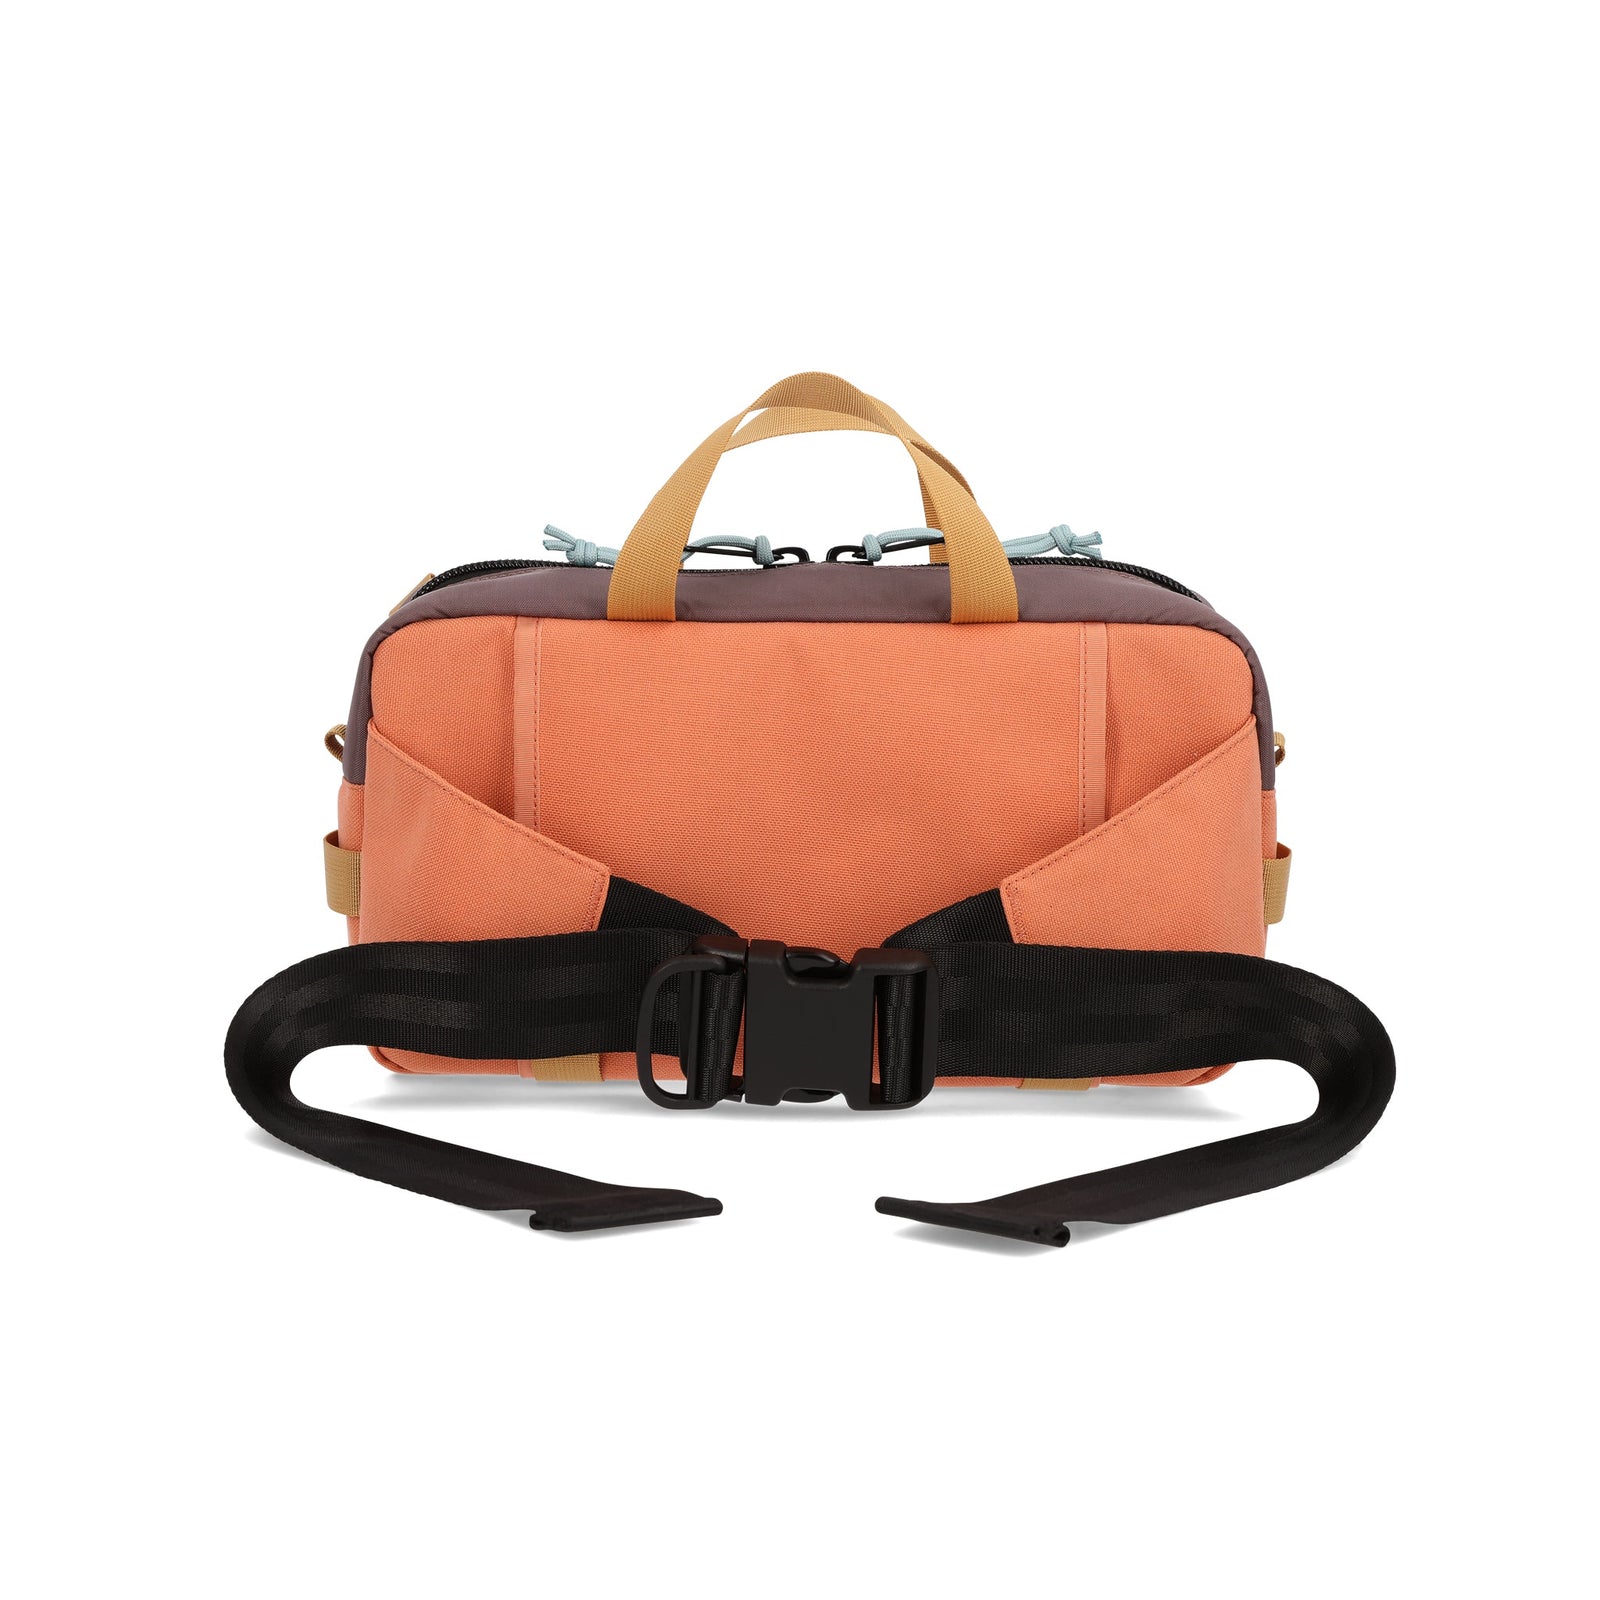 Topo Designs Quick Pack hip fanny pack in "Coral / Peppercorn" nylon.